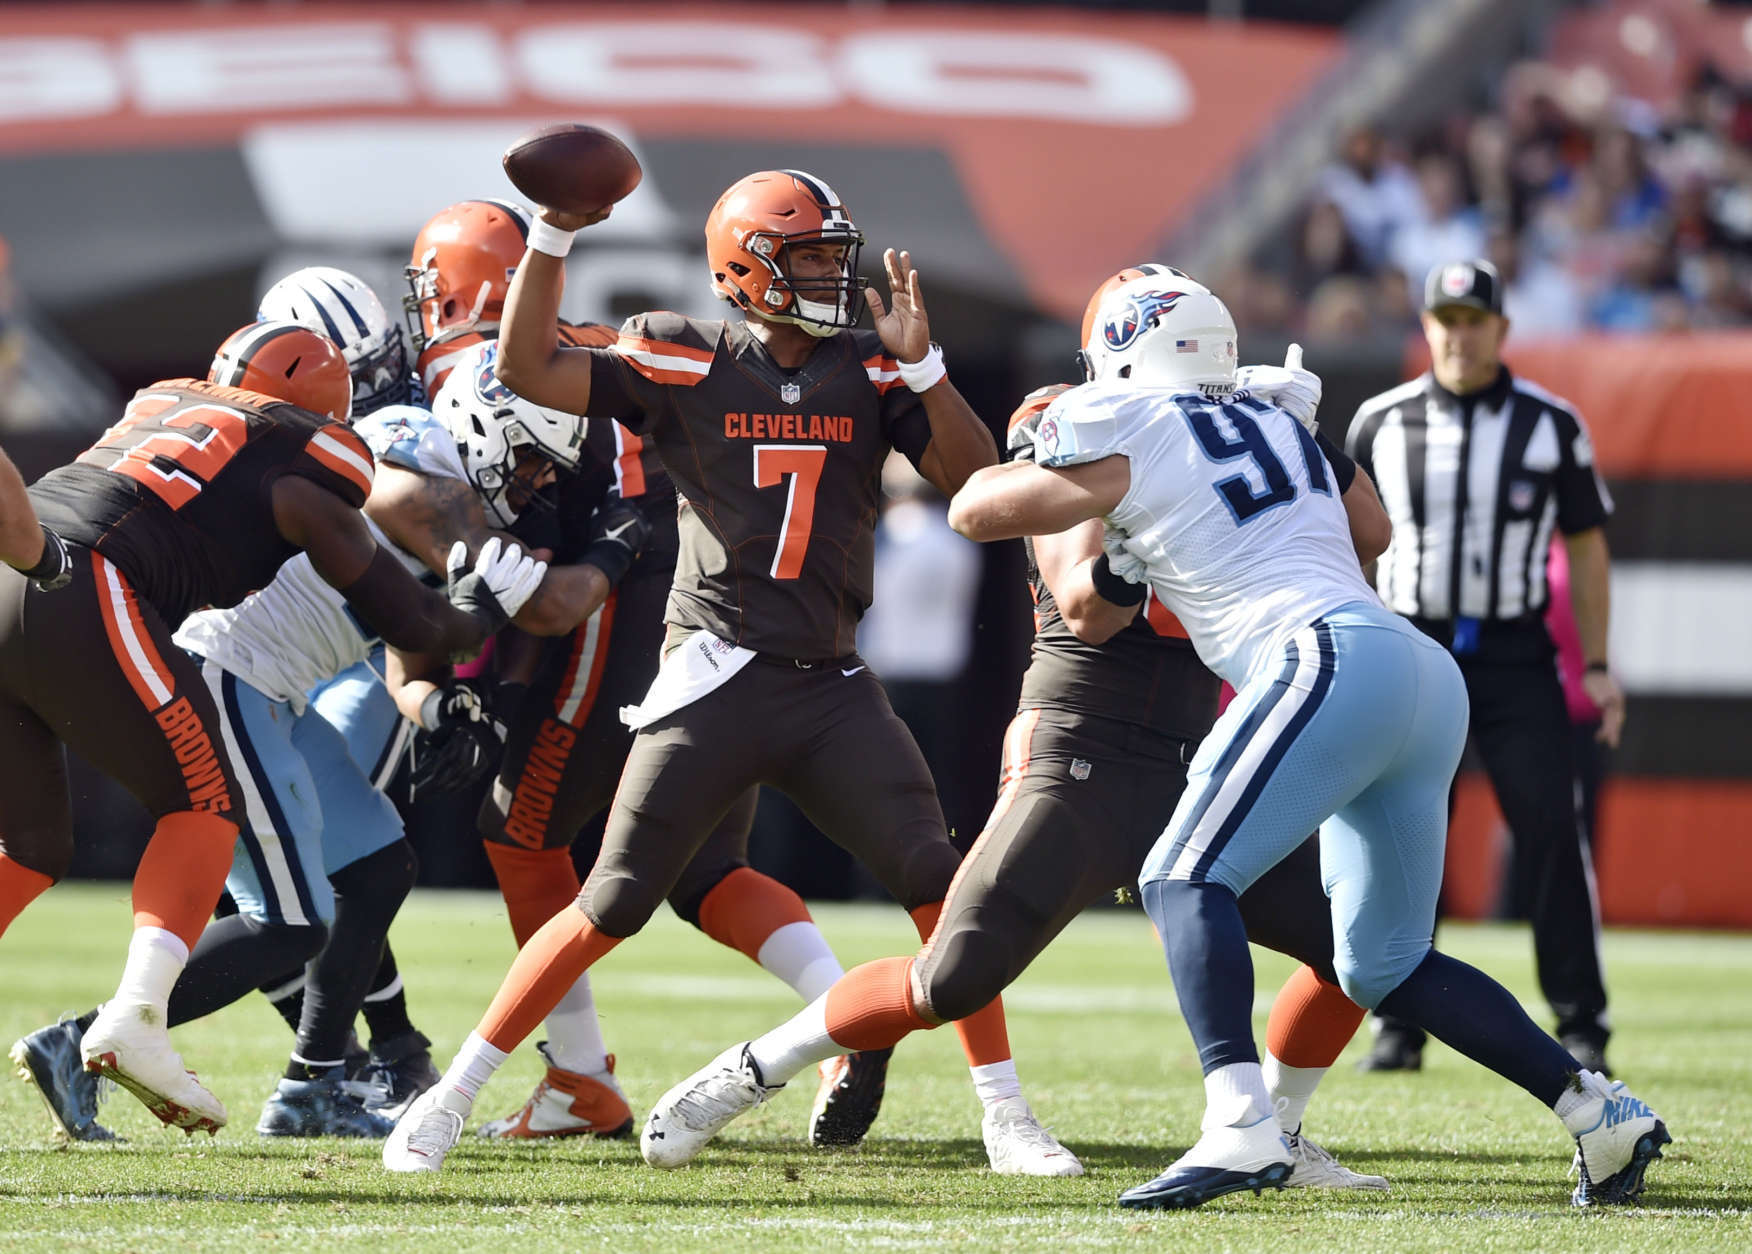 Cleveland Browns quarterback DeShone Kizer (7) passes against the Tennessee Titans in the first half of an NFL football game, Sunday, Oct. 22, 2017, in Cleveland. (AP Photo/David Richard)